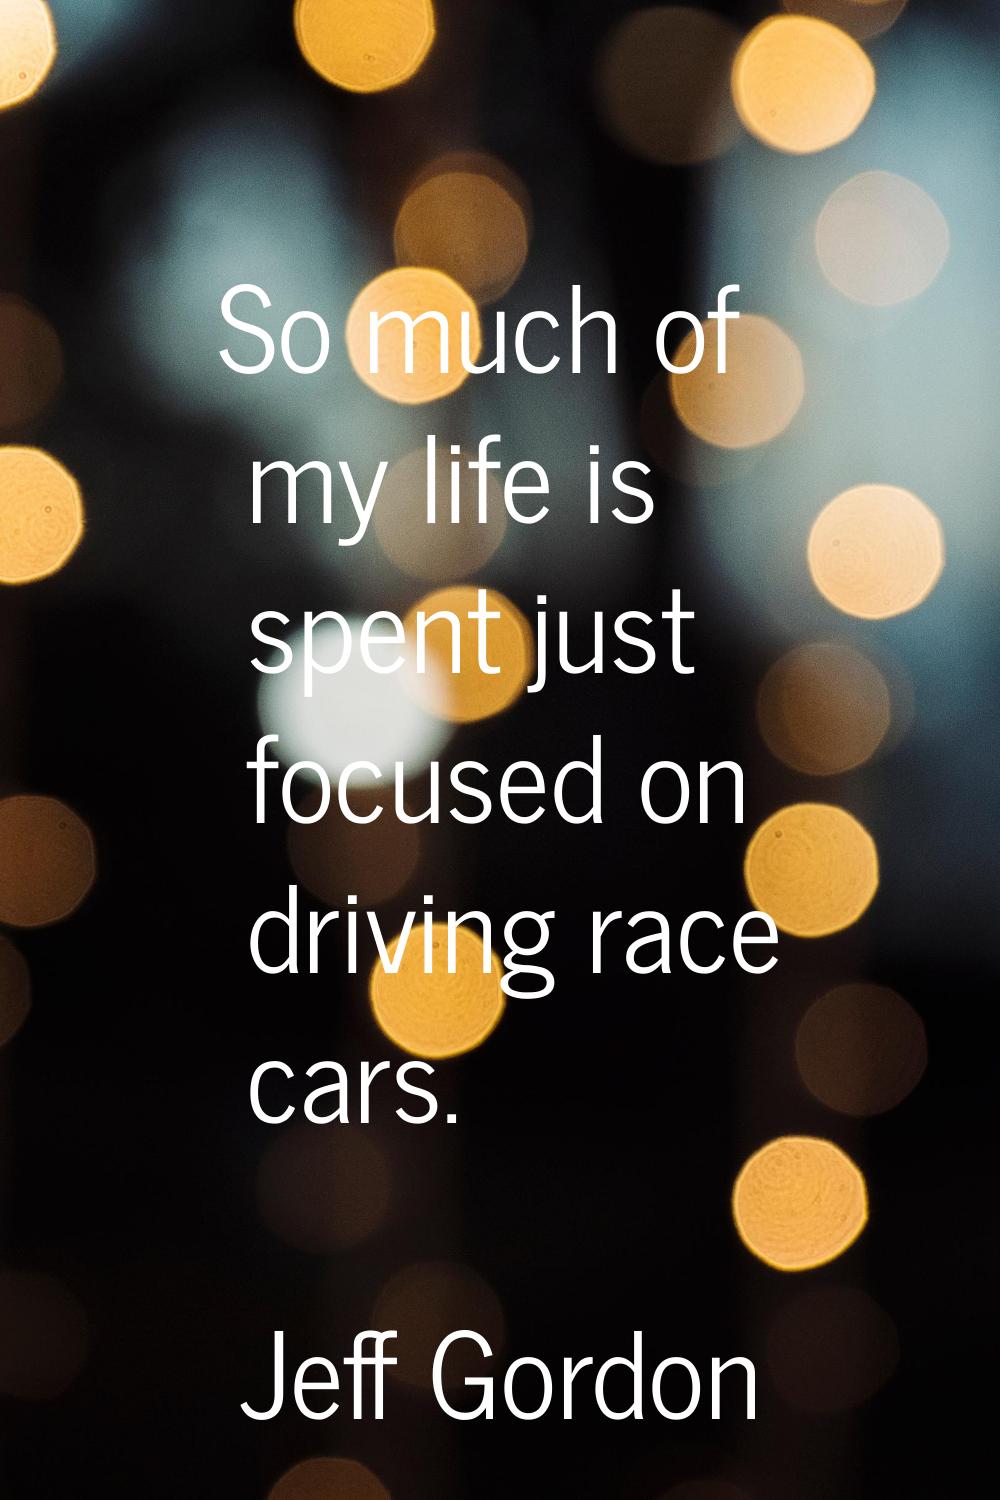 So much of my life is spent just focused on driving race cars.